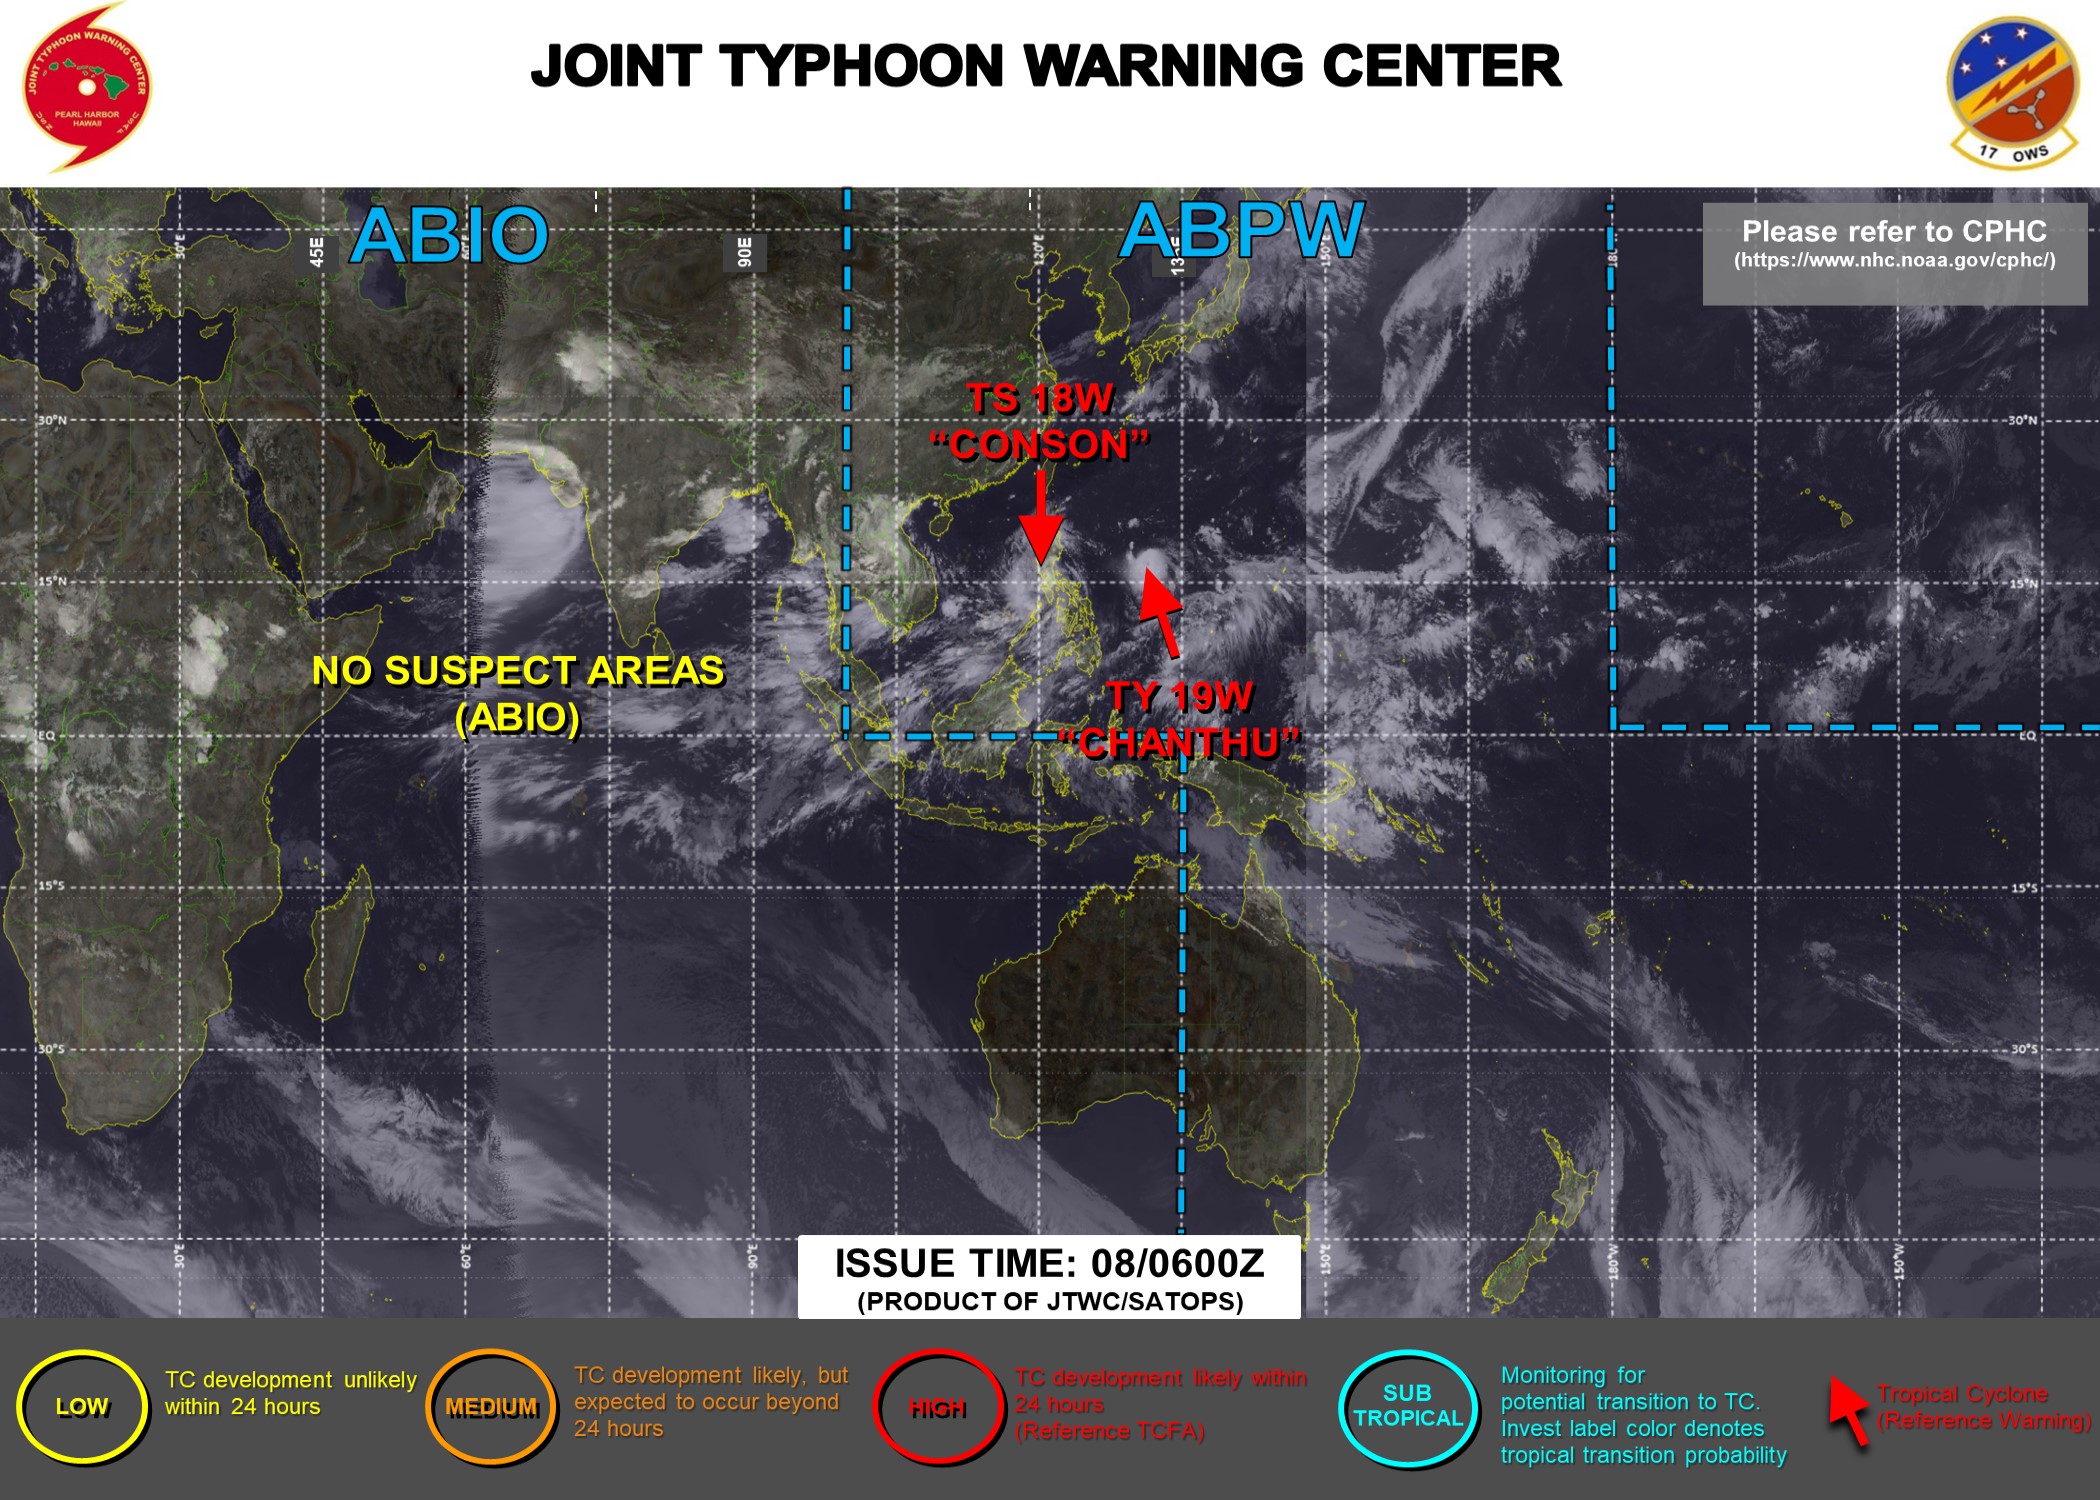 JTWC ARE ISSUING 6HOURLY WARNINGS AND 3HOURLY SATELLITE BULLETINS ON 18W AND 19W.